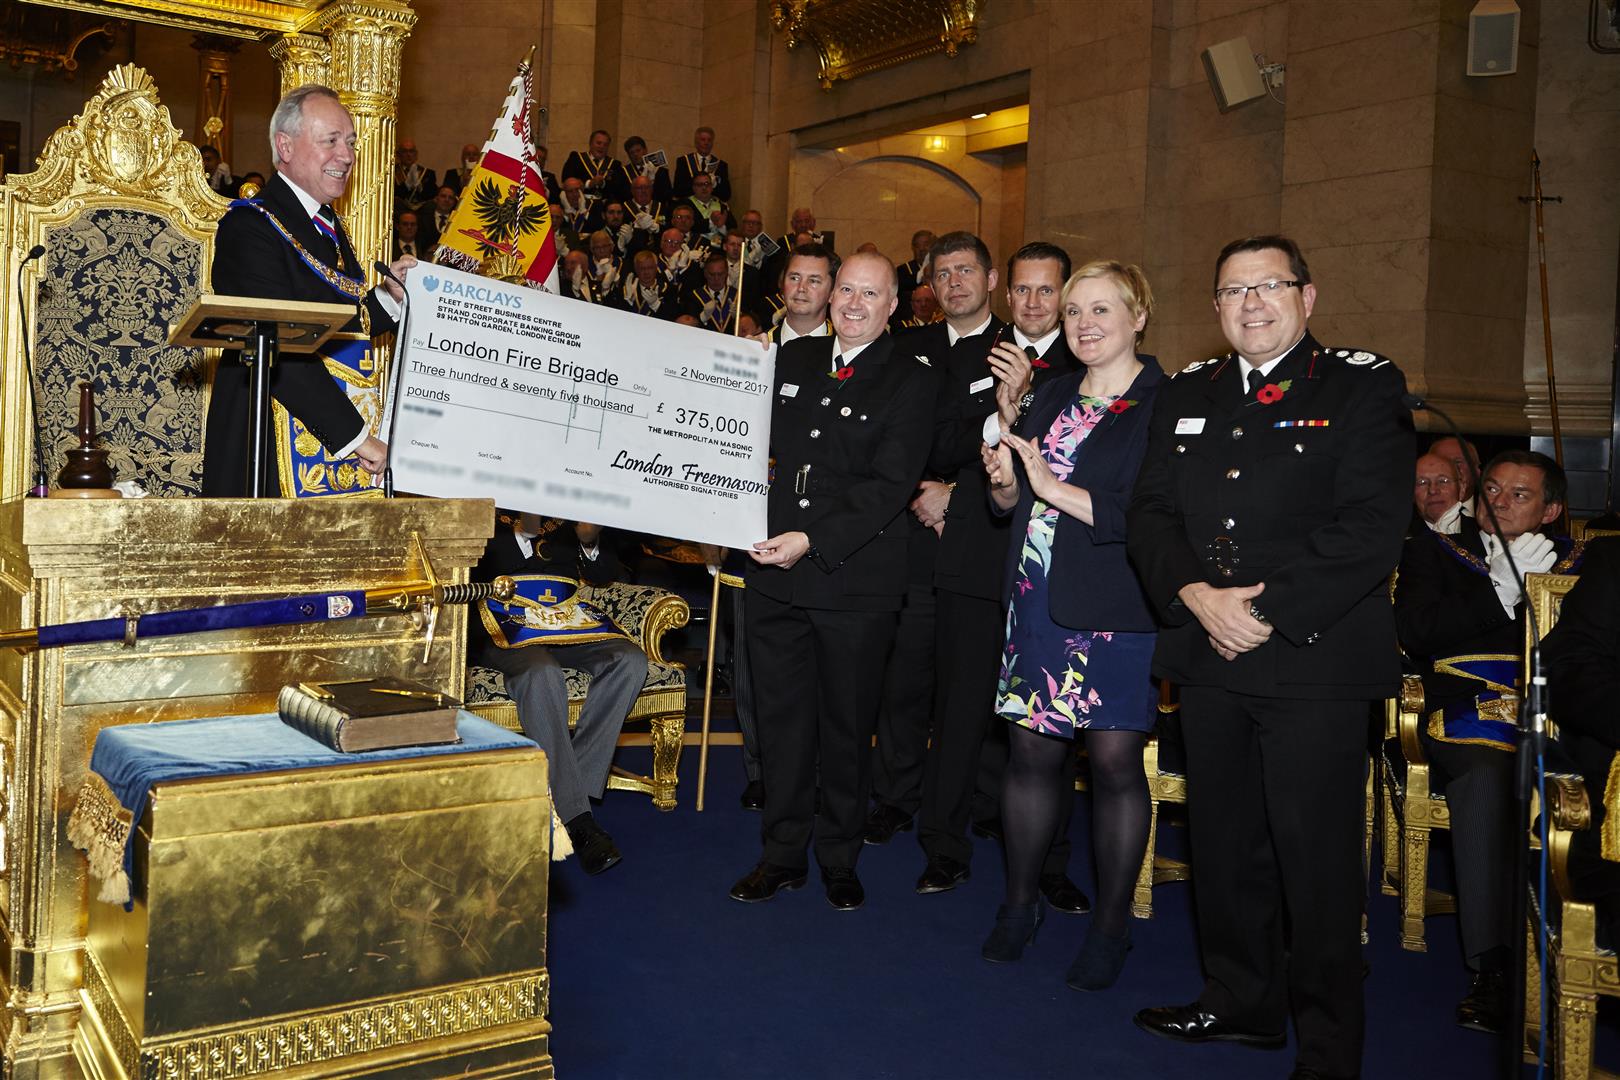 Picture of Sir Michael Snyder, the Metropolitan Grand Master presented the first instalment of £375,000 to Steve Apter, London Fire Brigade Director of Safety and Assurance.